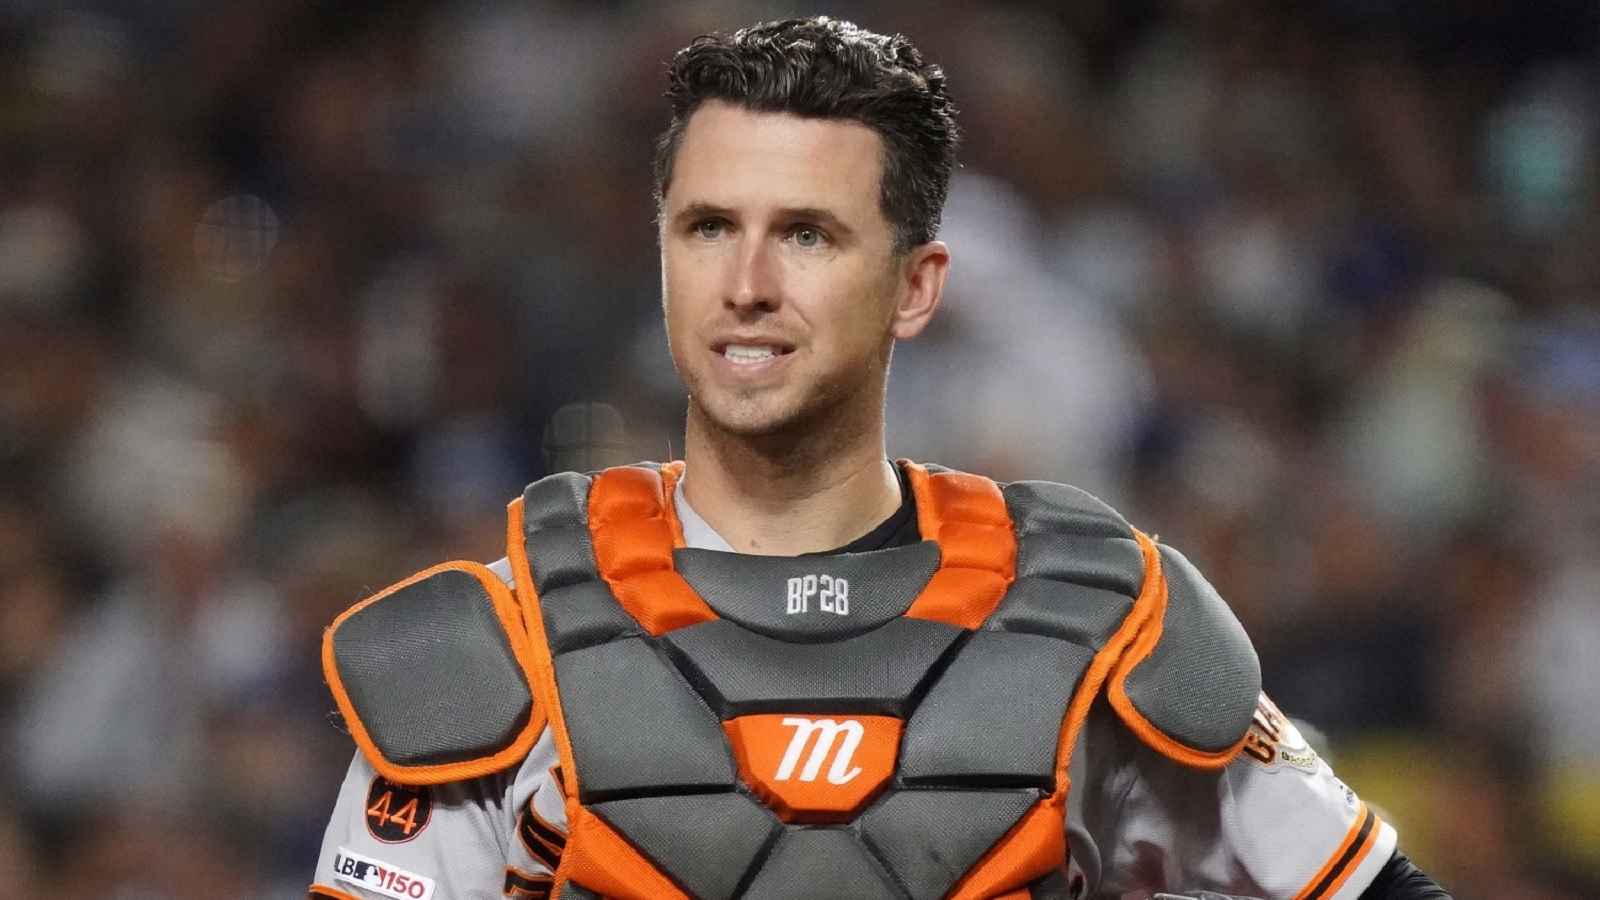 Download Buster Posey Giants Wallpaper